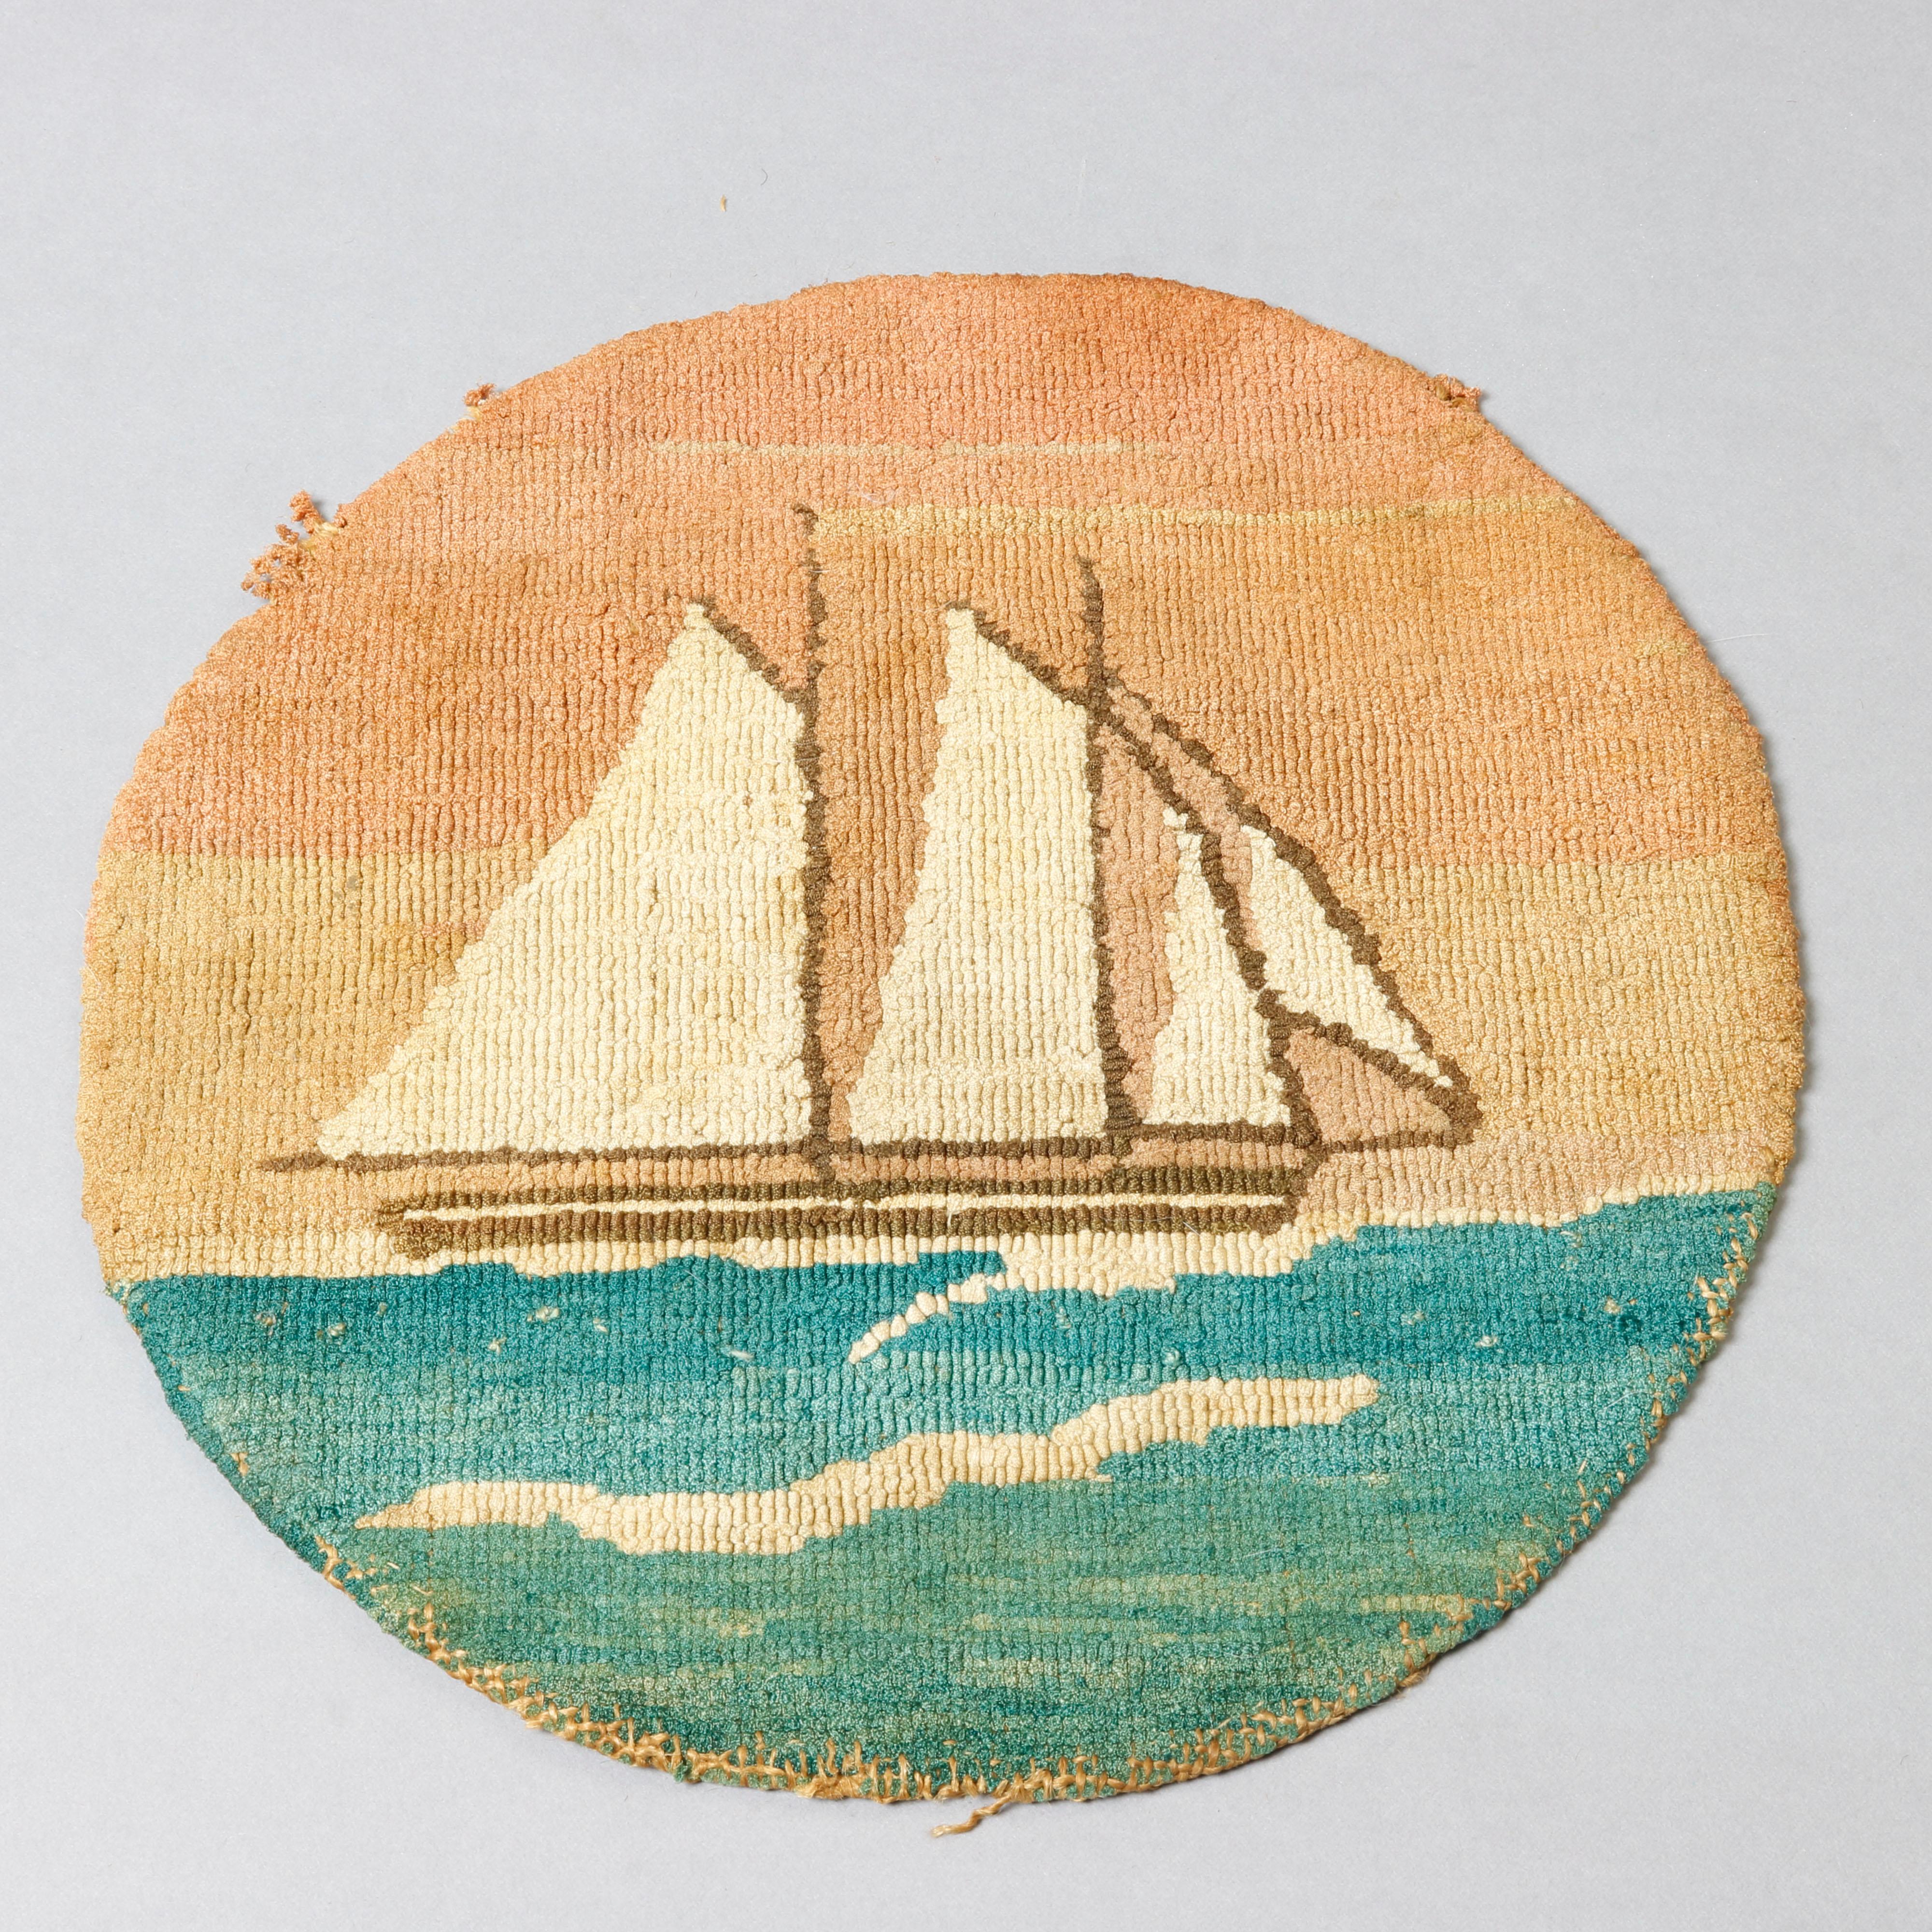 Two antique Grenfell Labrador, newfoundland hand knotted mats including one seascape with tall mast sailing ship and owned with polar bear on iceberg, original labels as photographed, circa 1920.

Measures-10.5